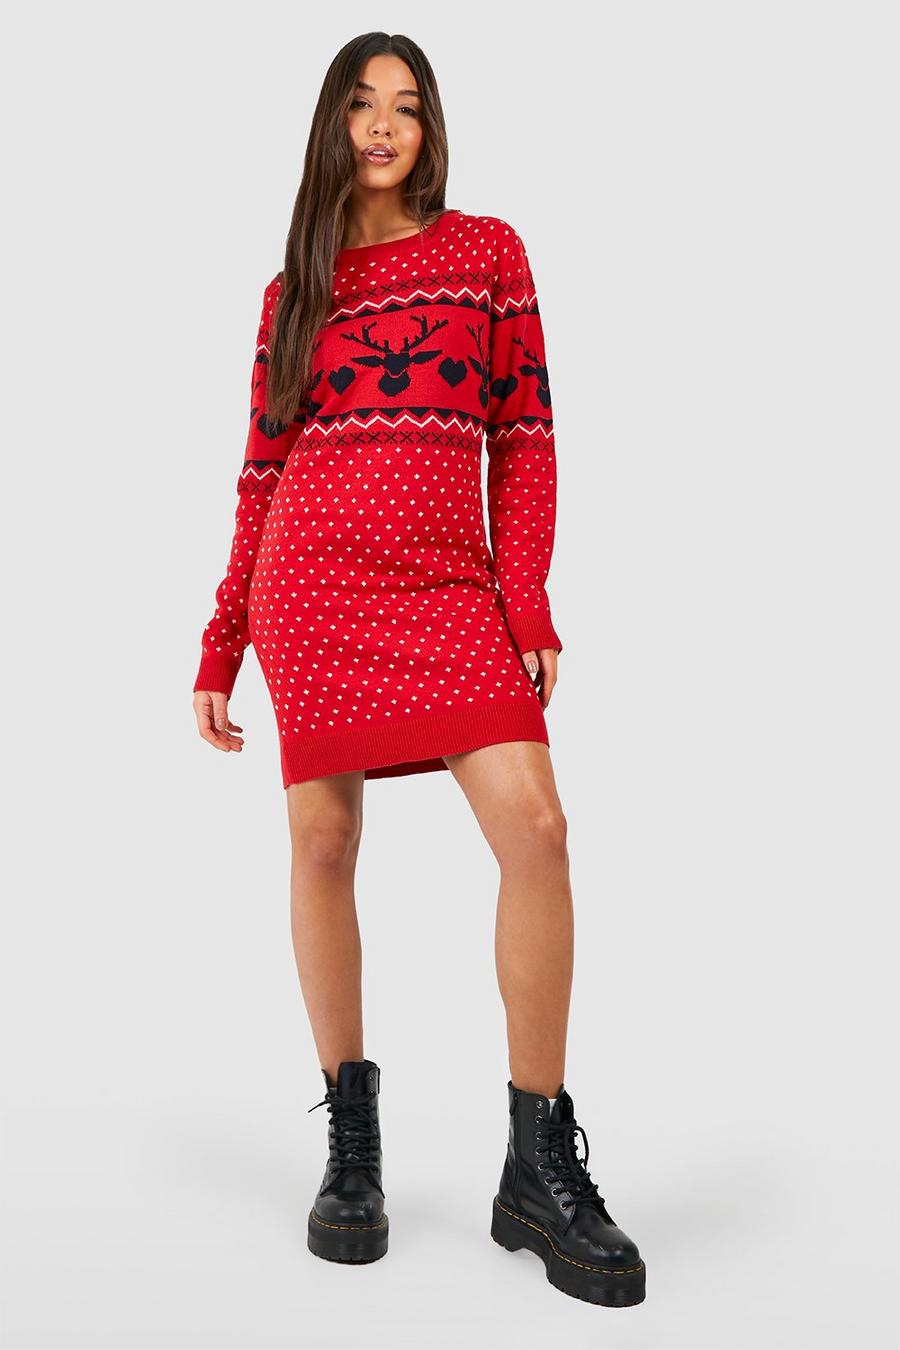 Red Hearts Fairisle Christmas Sweater Dress image number 1